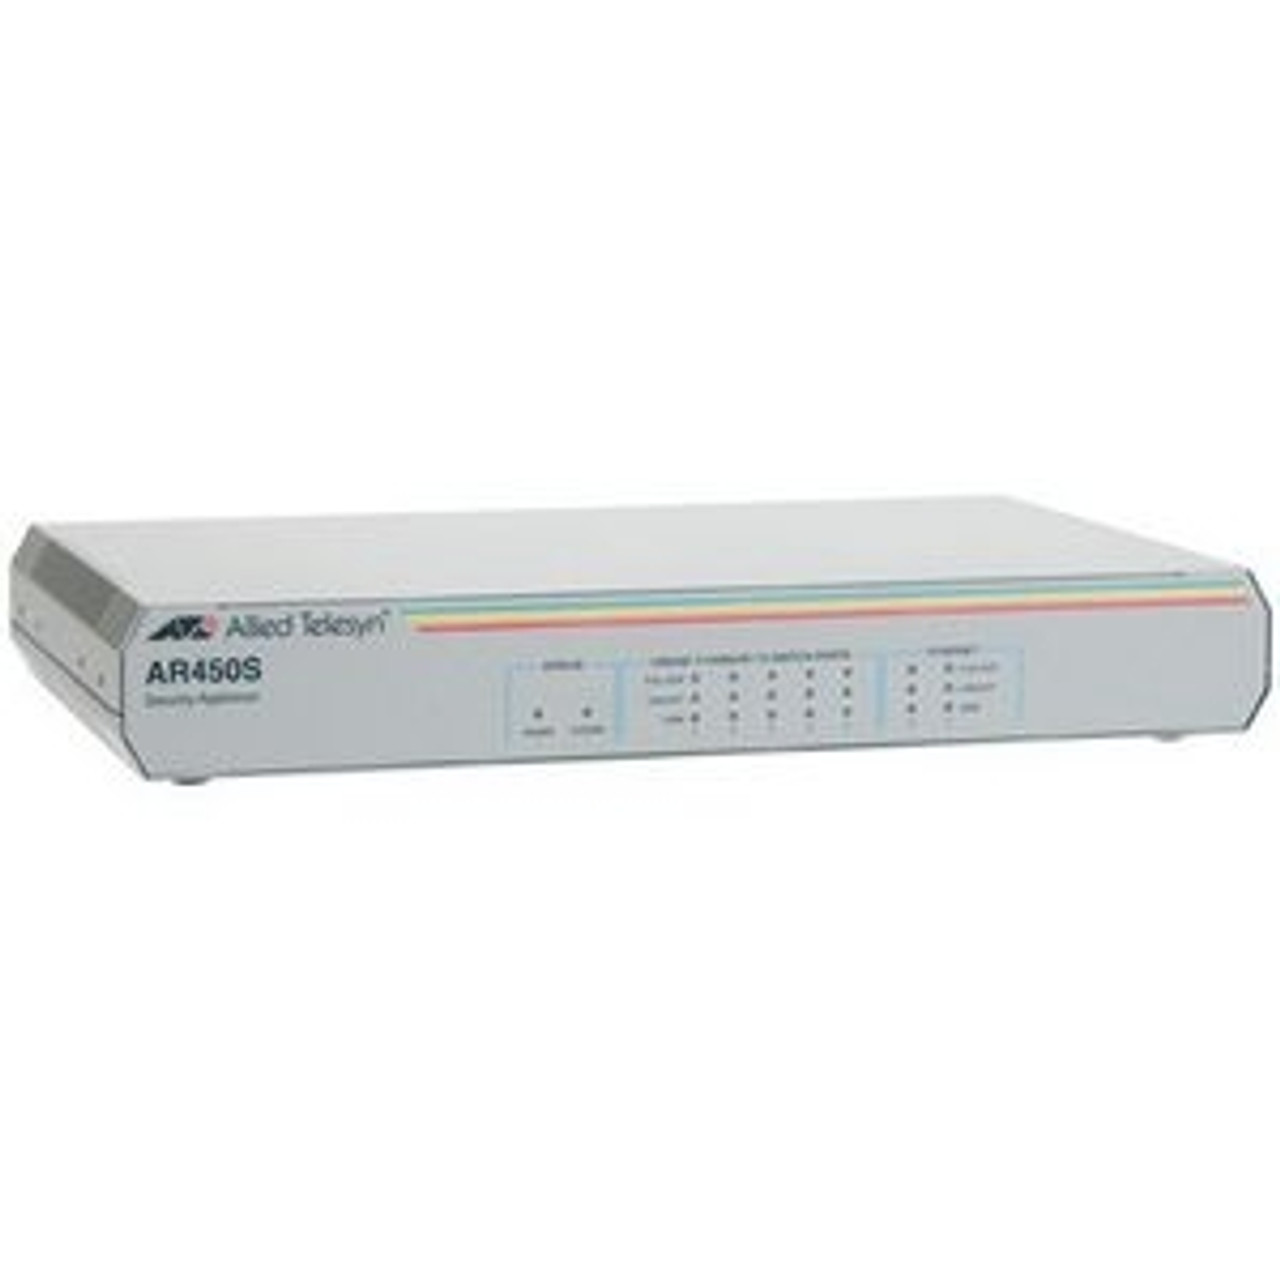 AT-AR450S Allied Telesis Secure Ethernet Router (Refurbished)